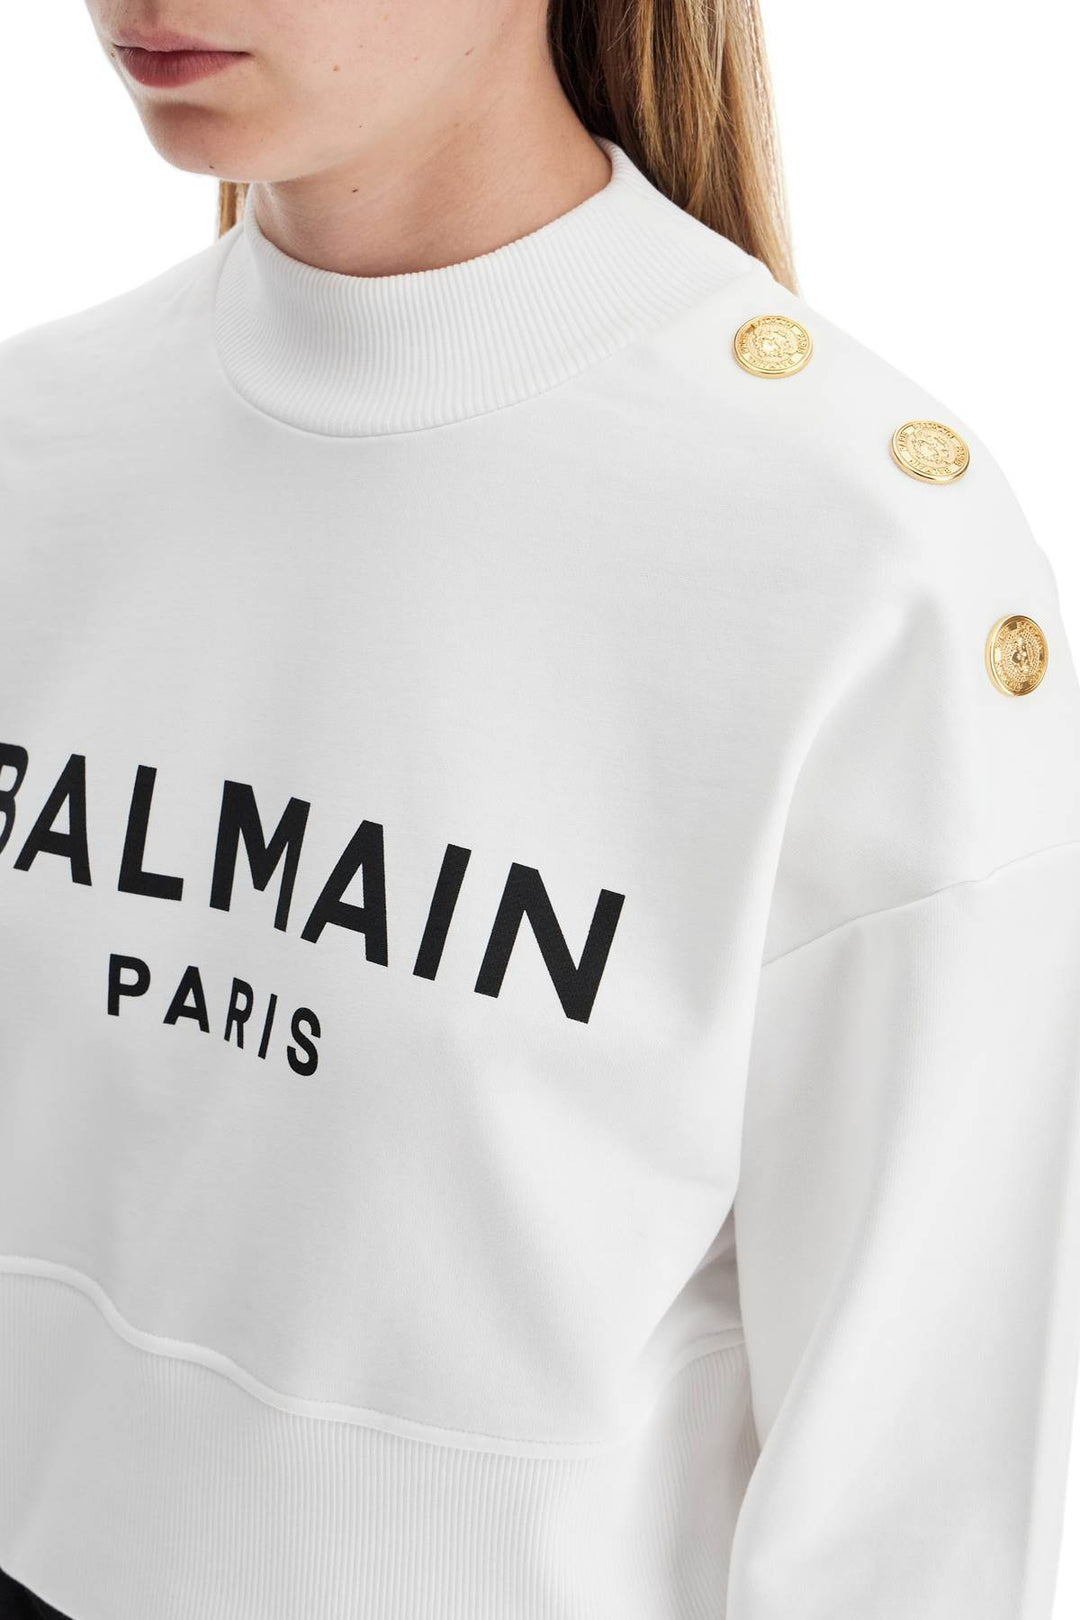 Balmain Cropped Sweatshirt With Buttons   White